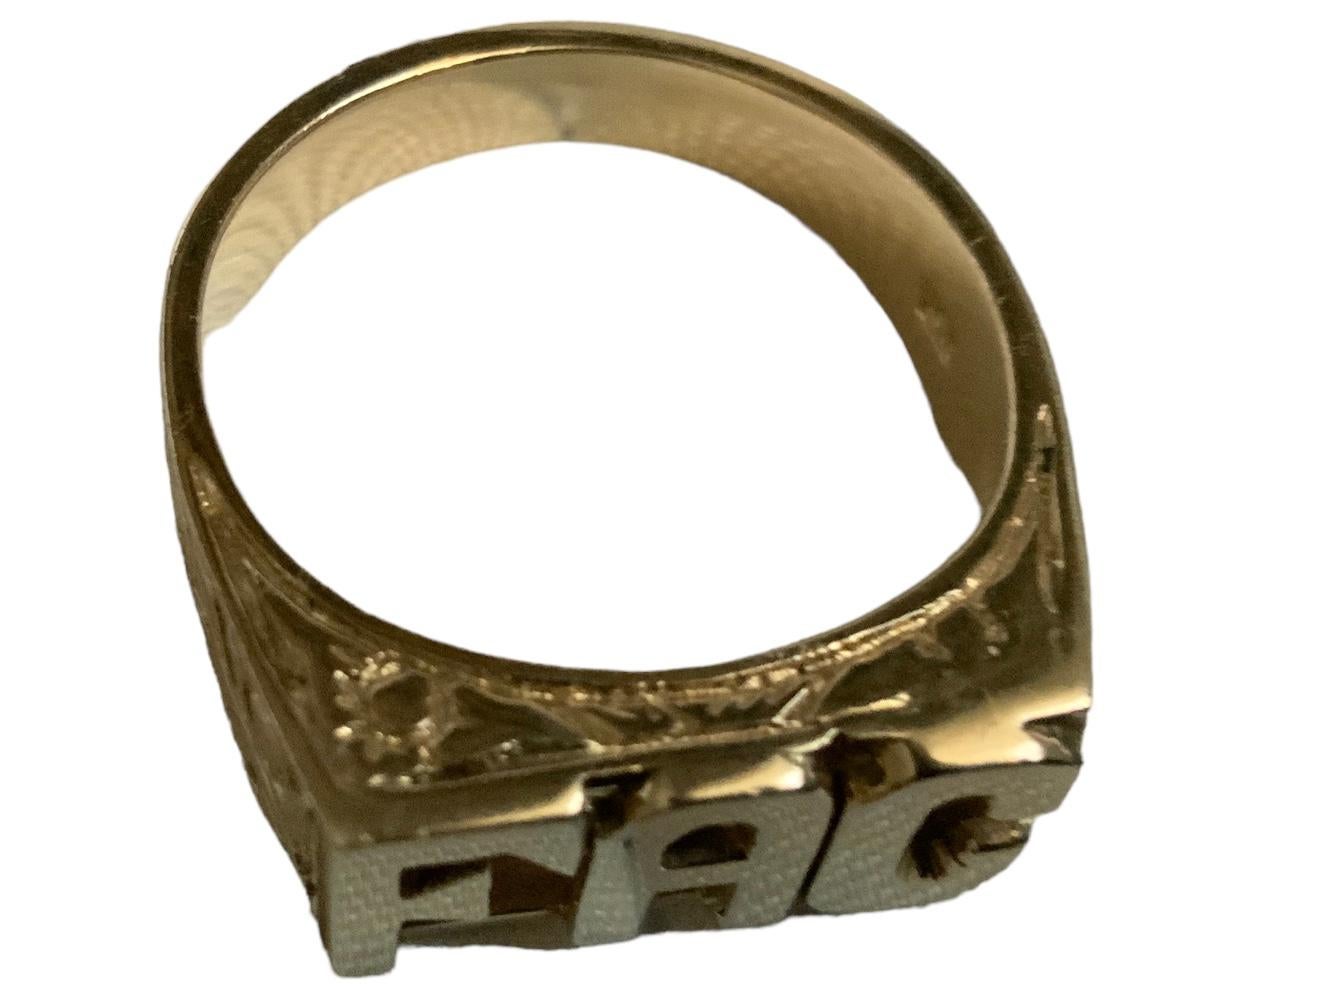 This is a 14K Yellow Gold Initials/Monogram Ring. It depicts a gold ring with the letters- F, A and C arranged horizontally at the top of the ring. The shanks are adorned with engraved S-shaped scrolls. The ring is hallmarked 14K below the shank.